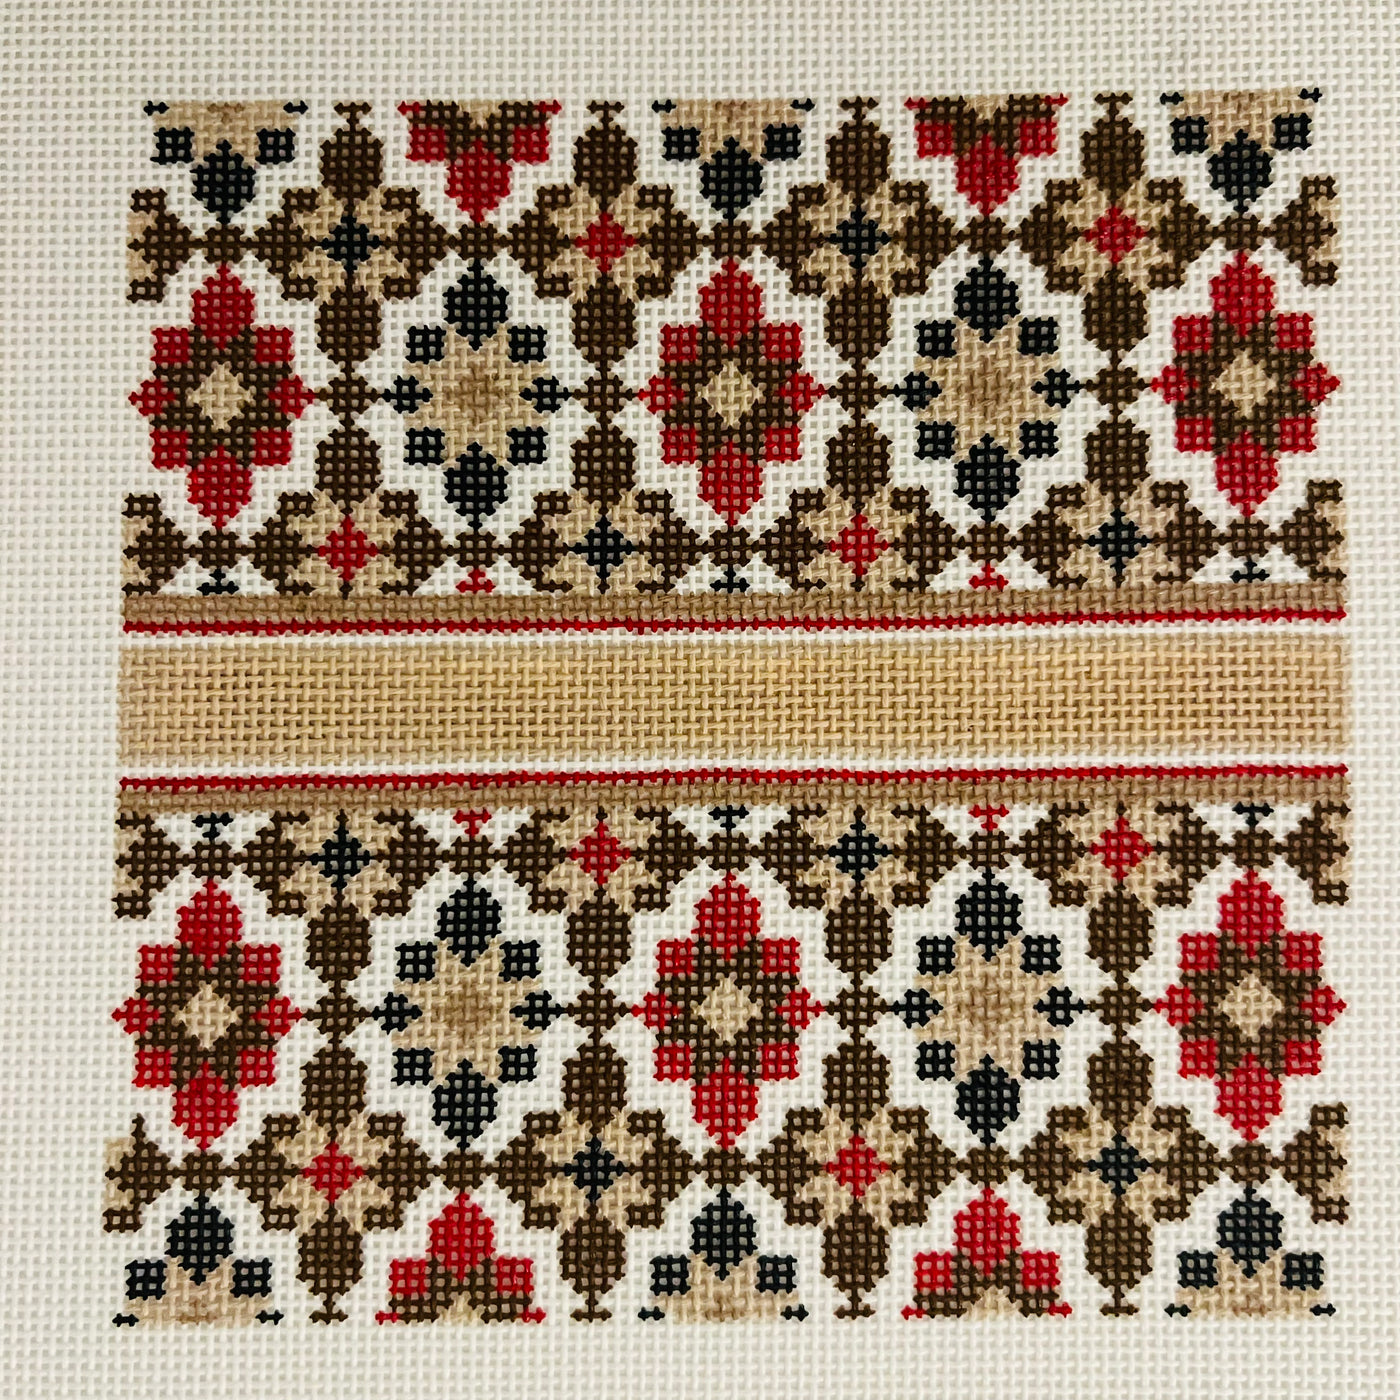 Portuguese Tiles 5" Square - Fall Needlepoint Canvas